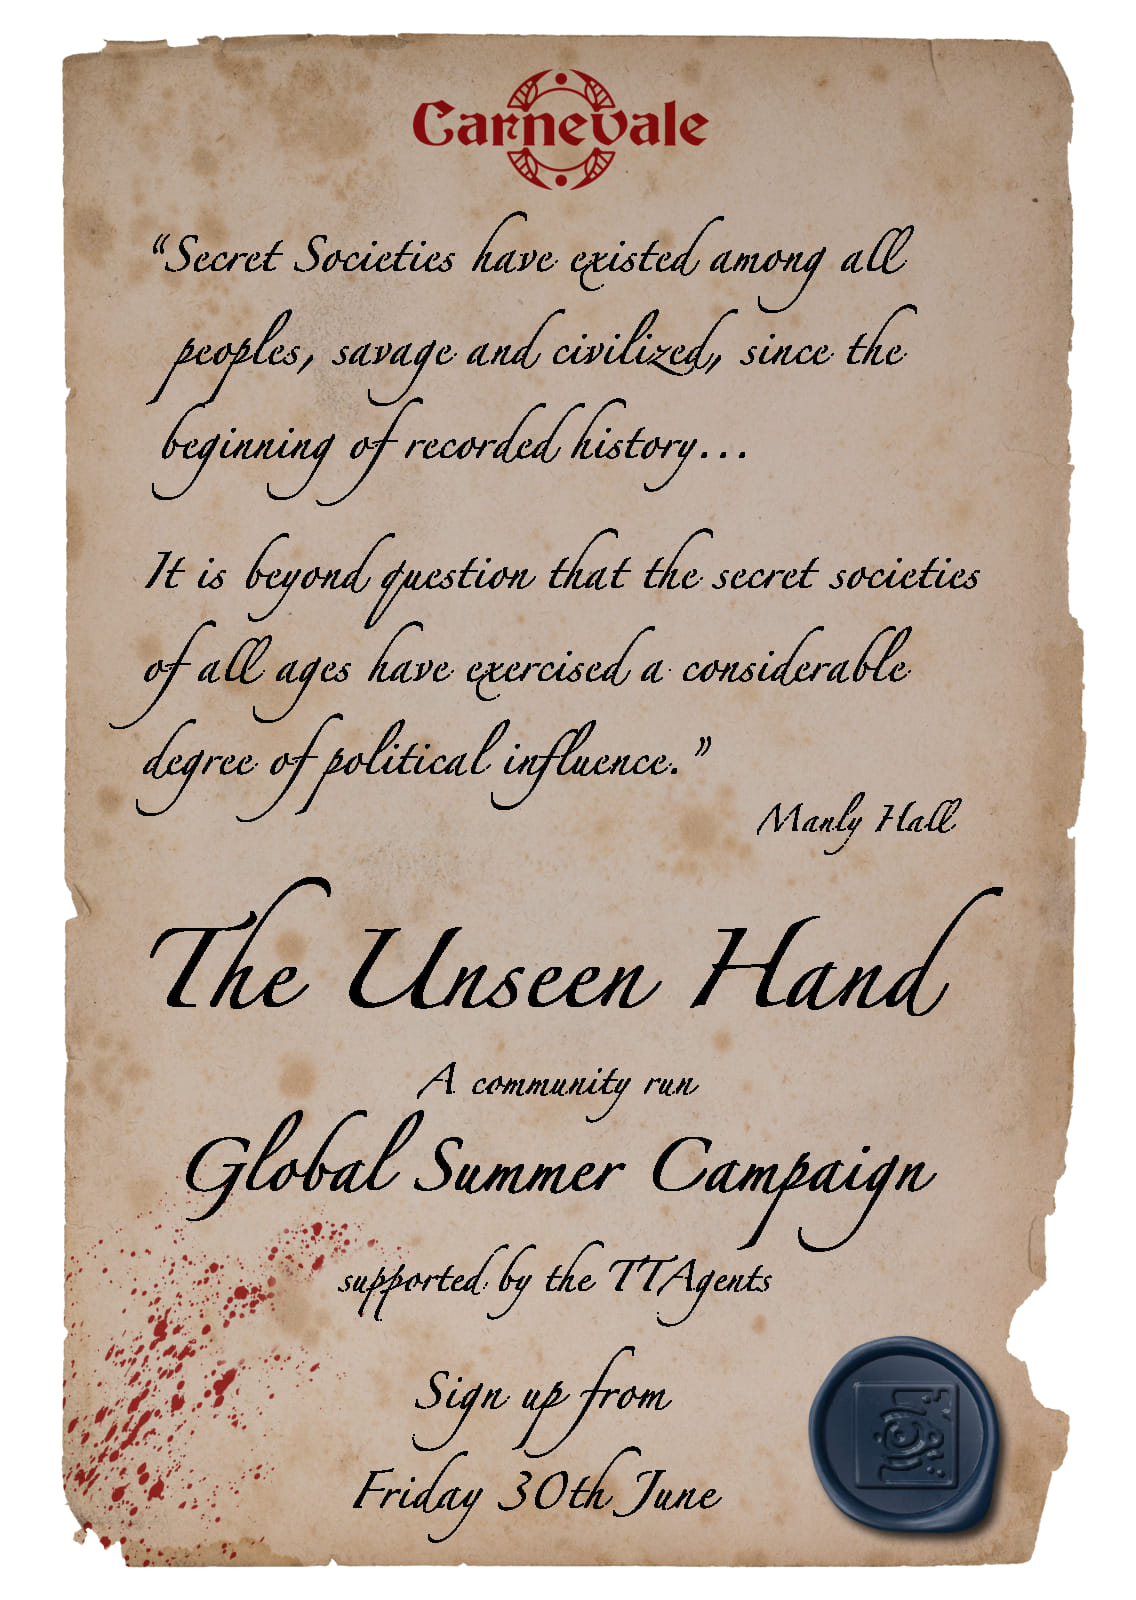 The Unseen Hand Campaign - Carnevale